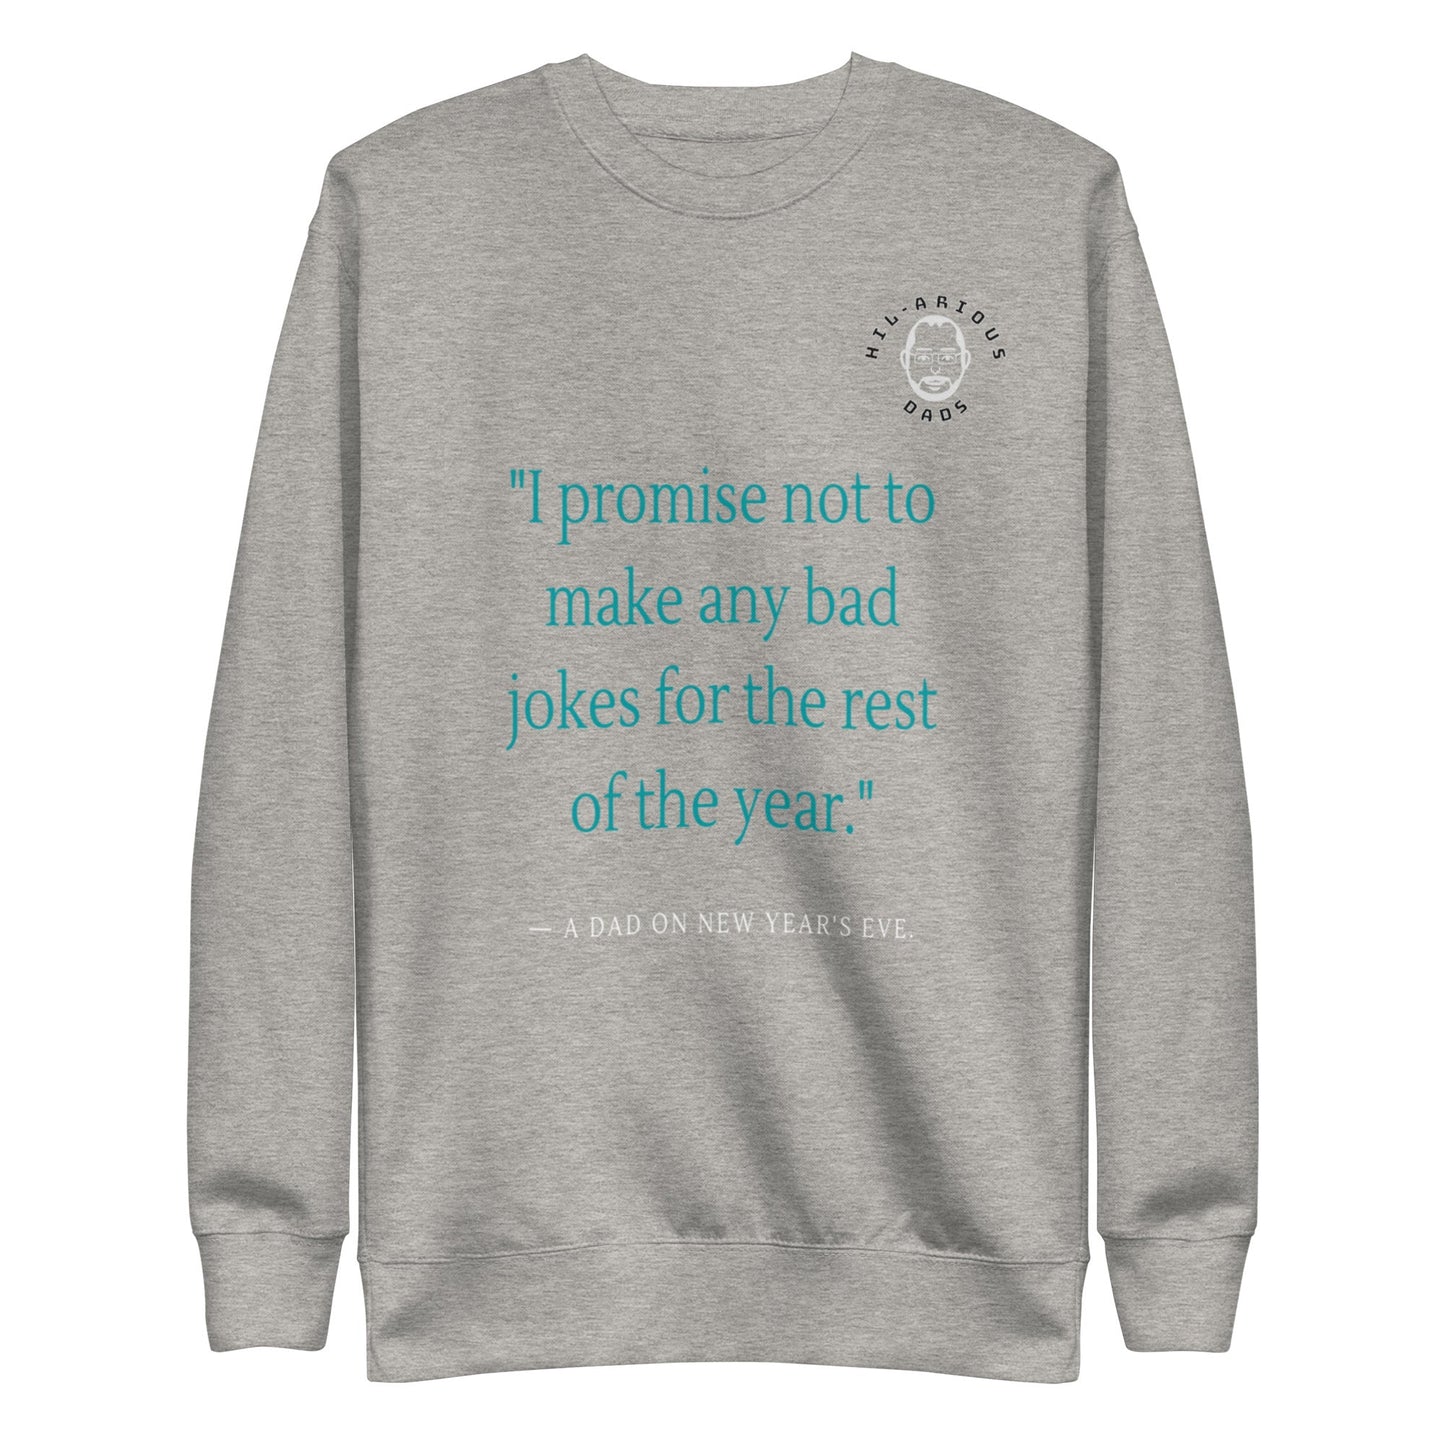 A dad's promise on New Year's Eve-Sweatshirt - Hil-arious Dads